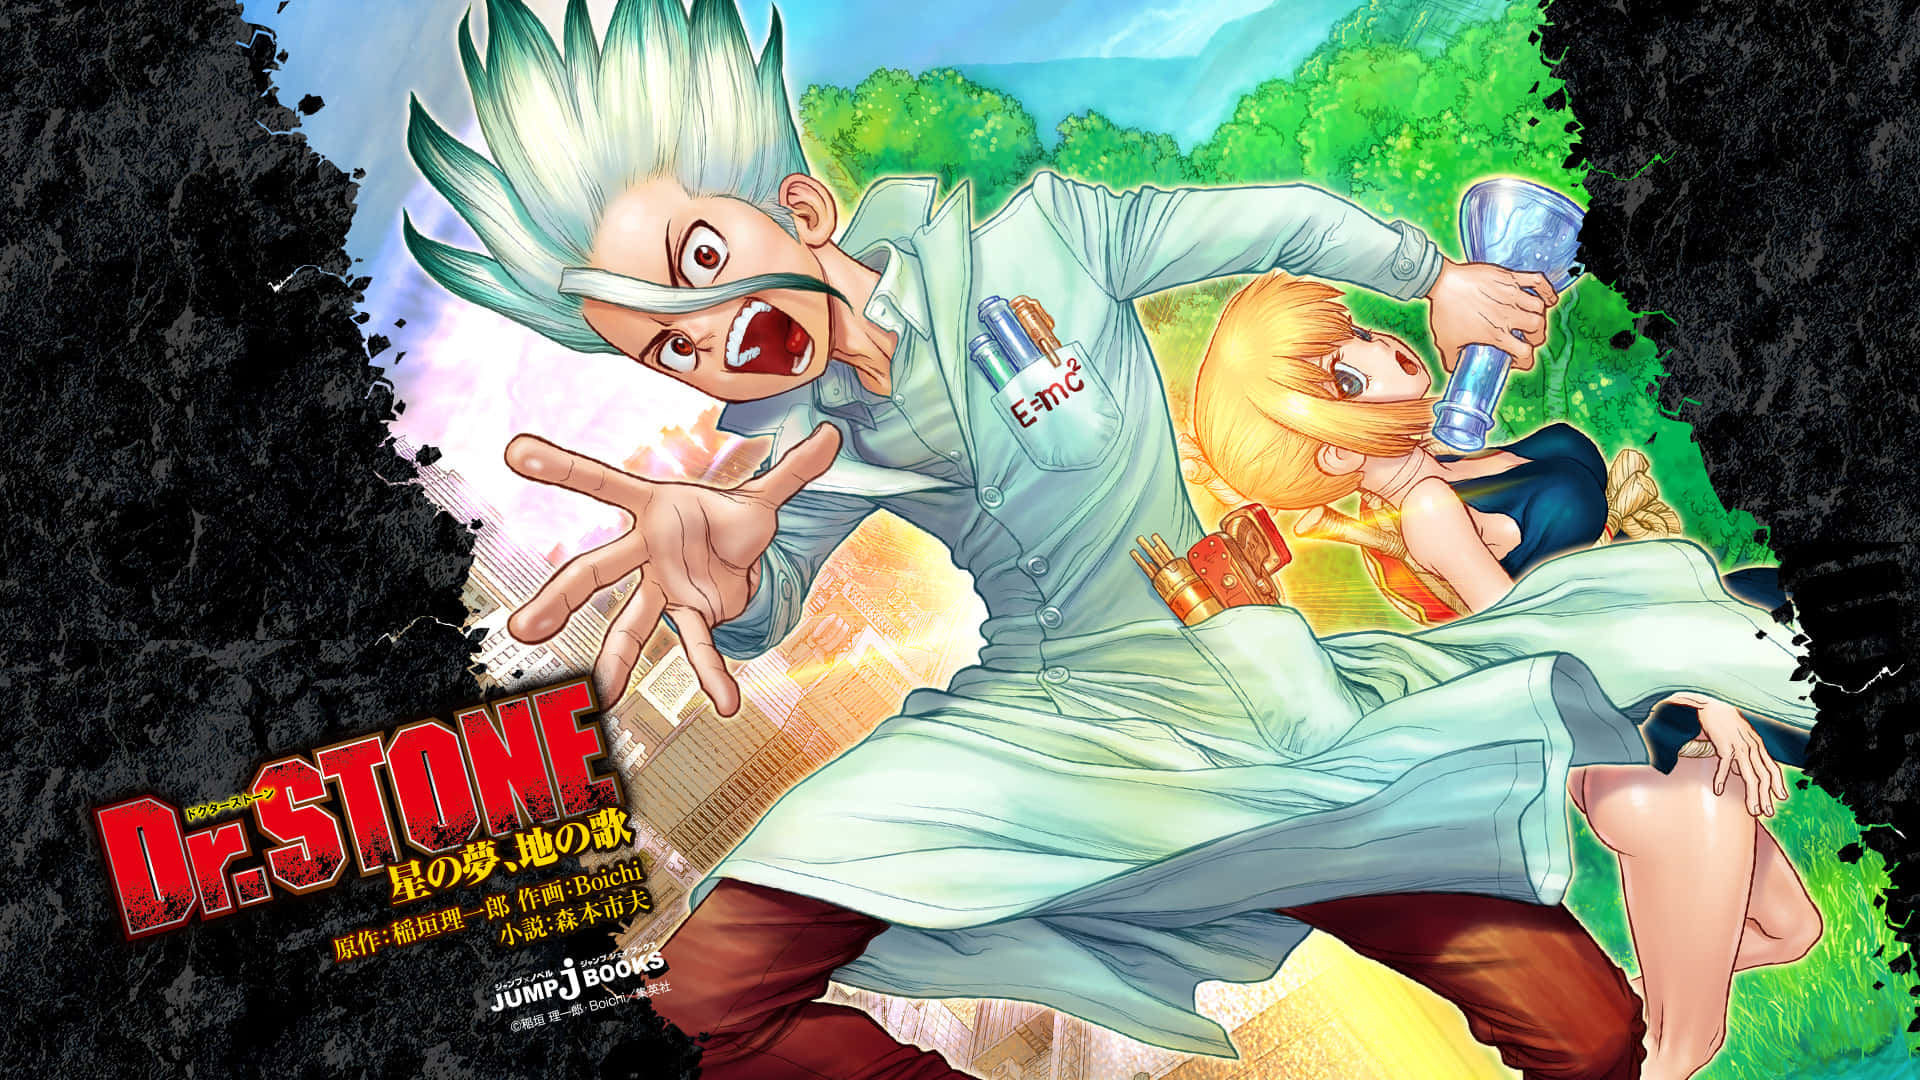 "Unlock the Secrets of the Stone World in Dr Stone!"